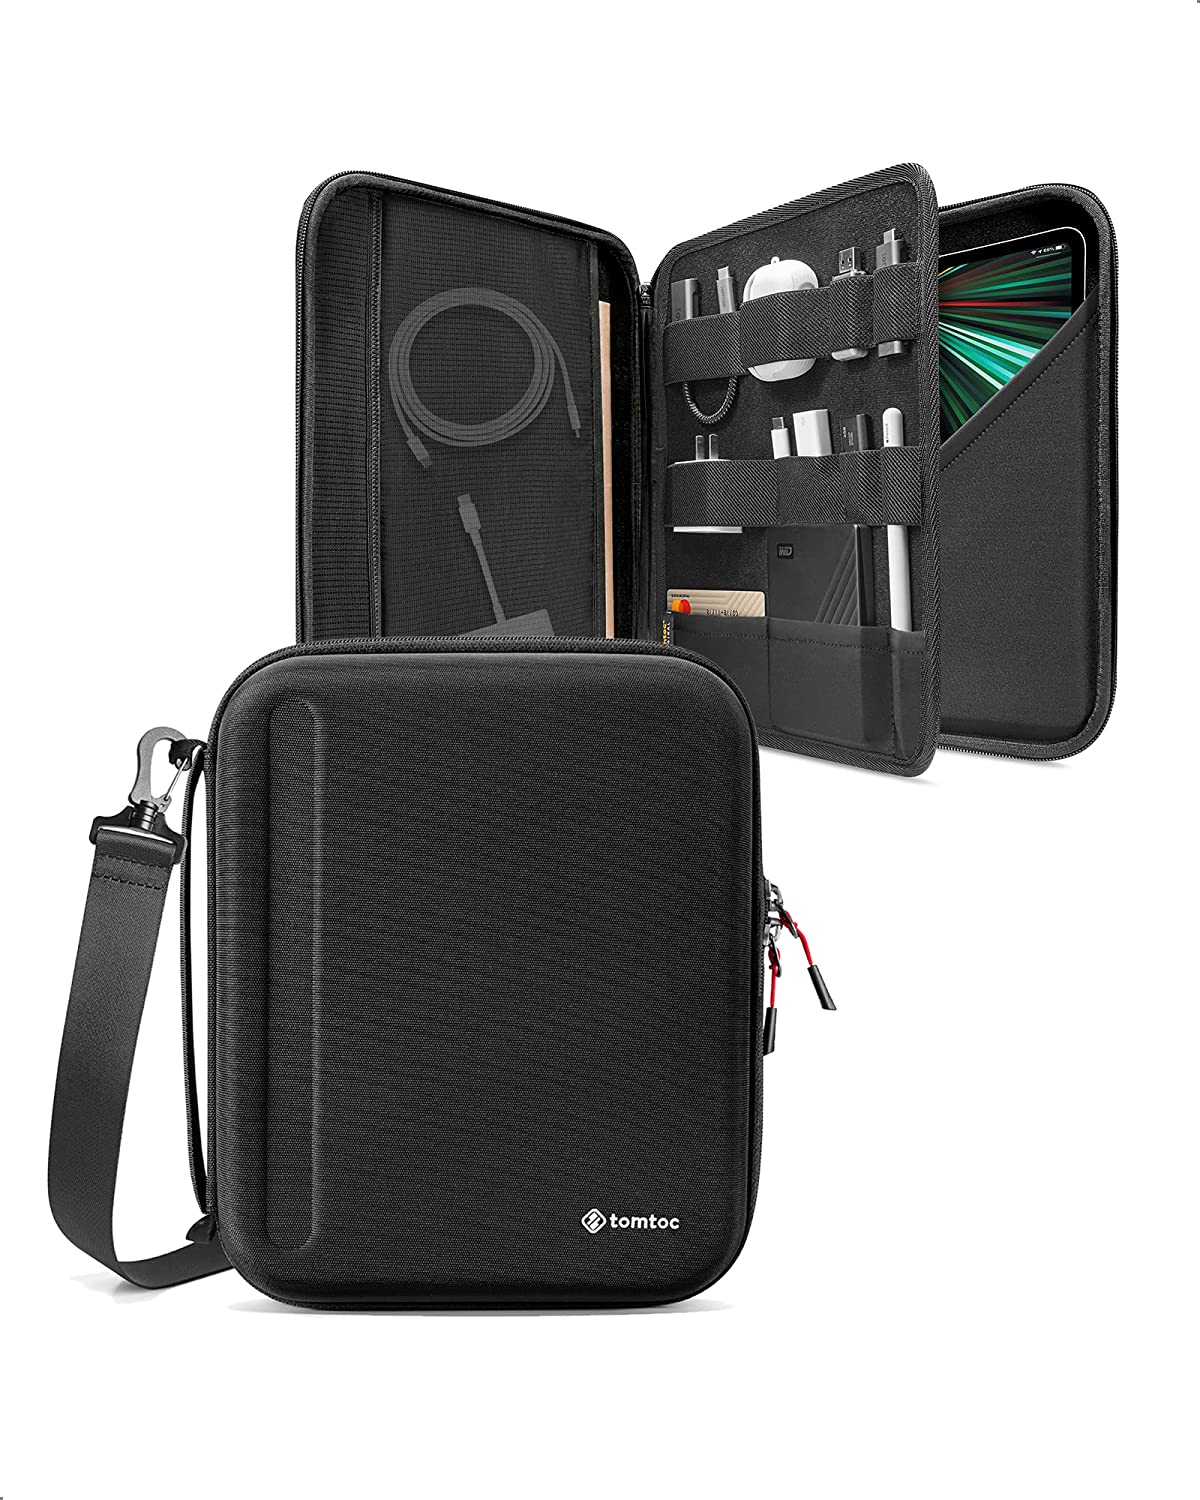 Tomtoc FancyCase-A06 iPad Case 12.9 inch with Strap Black